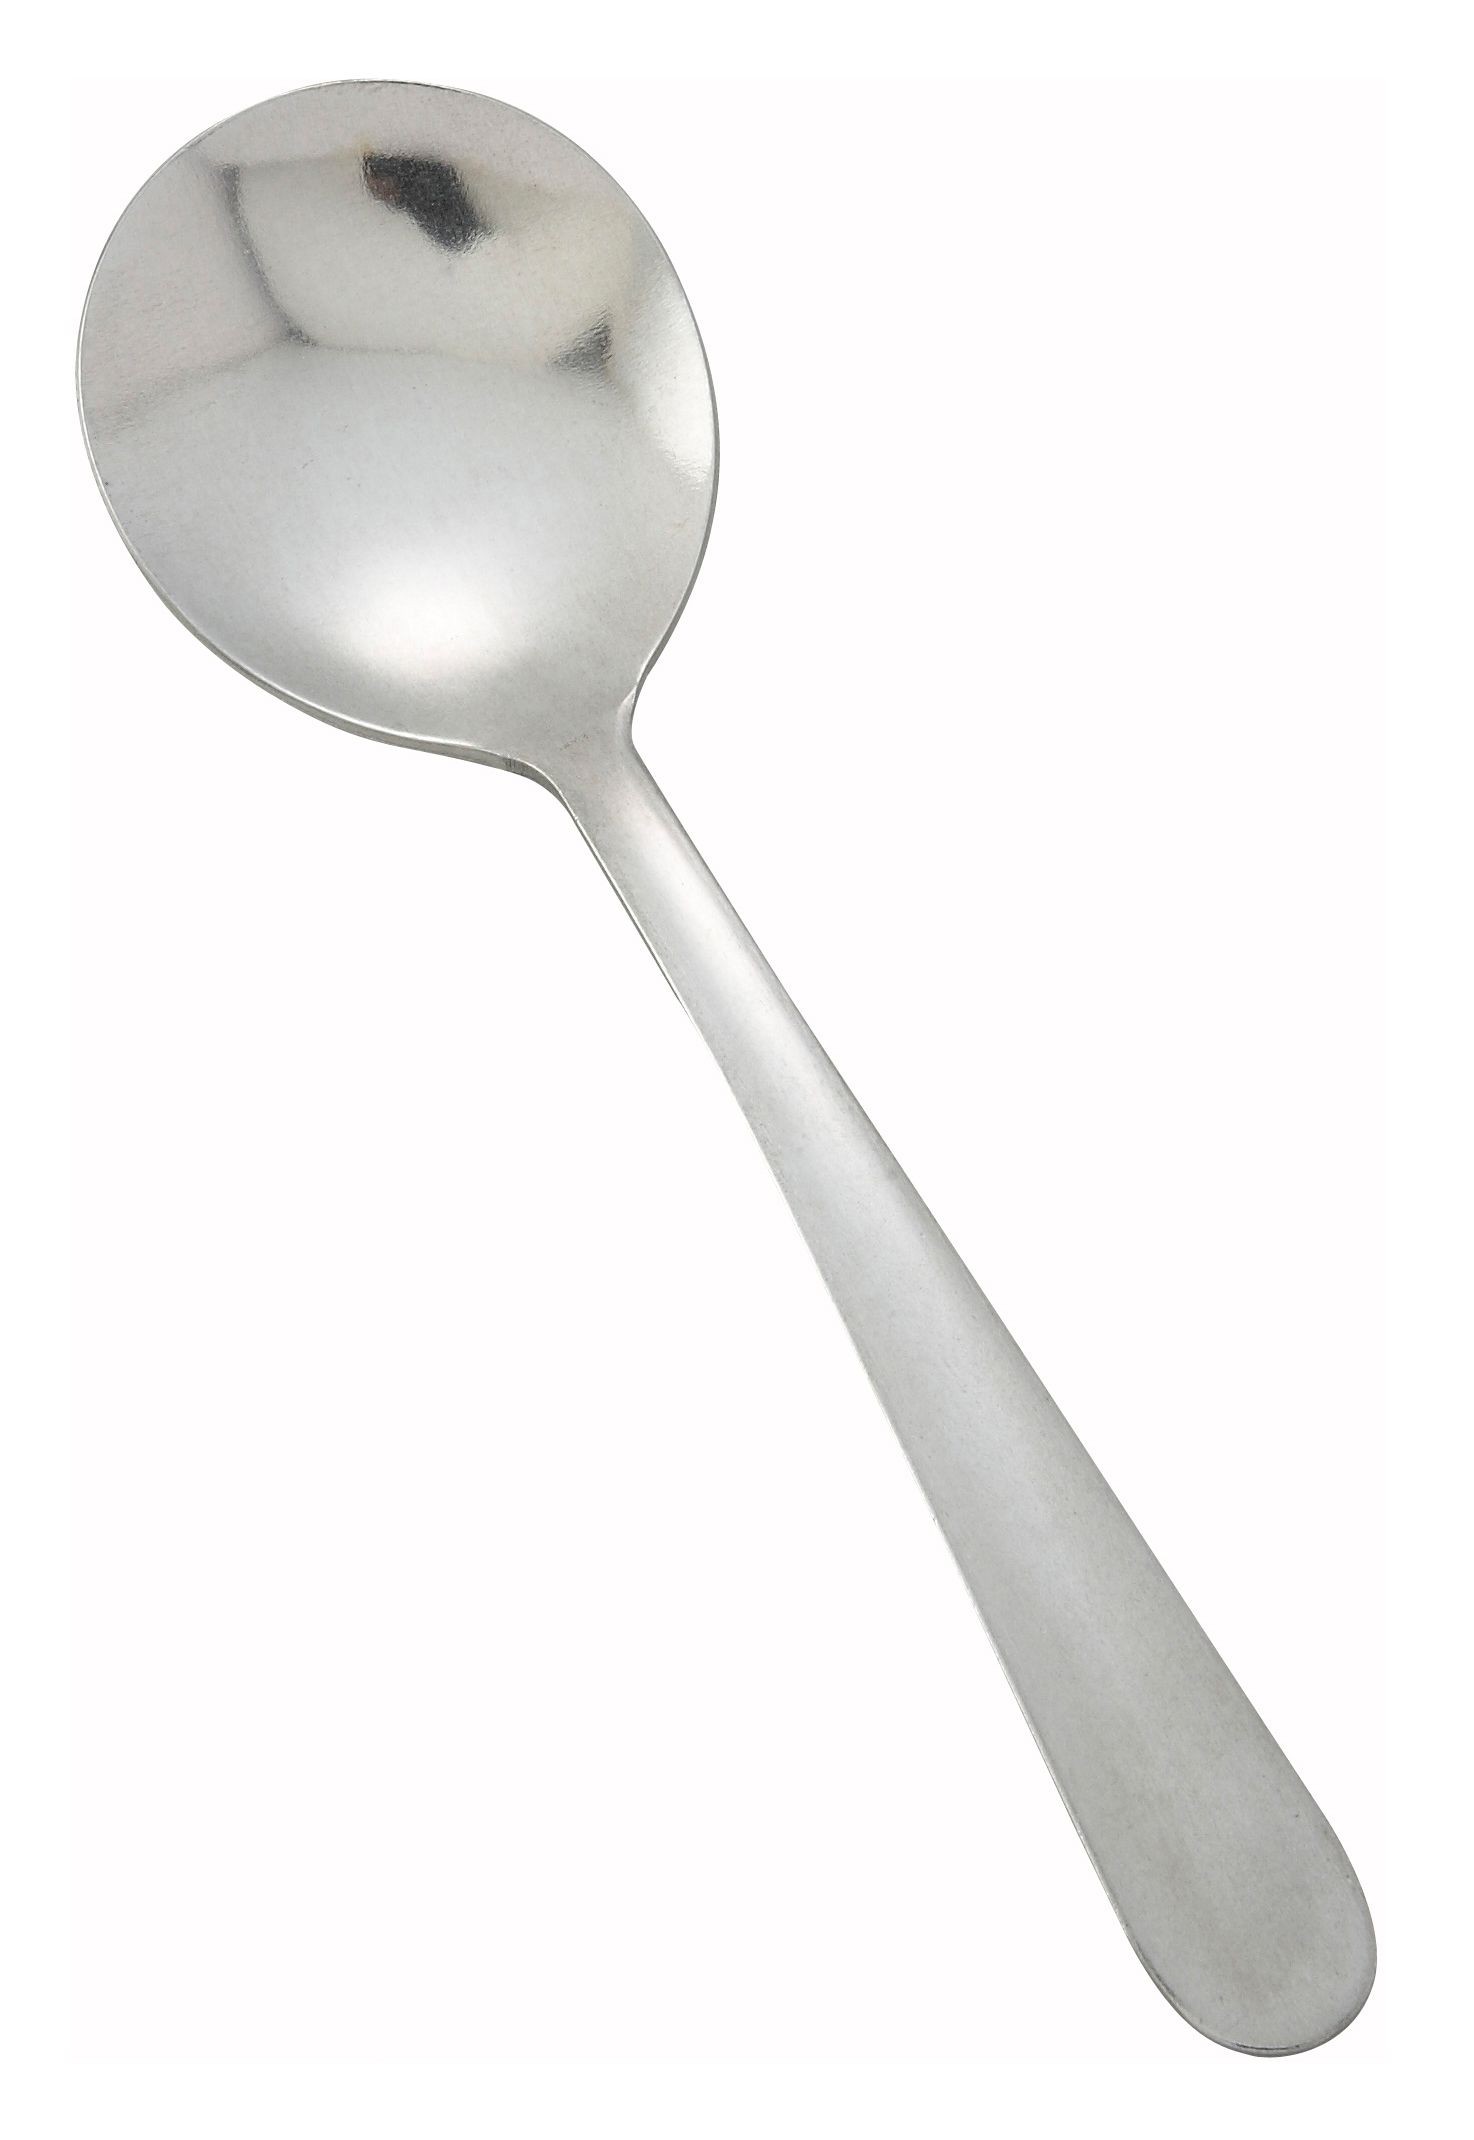 Winco 0012-04 Windsor Heavy Weight 18/0 Stainless Steel Bouillon Spoon (12/Pack)